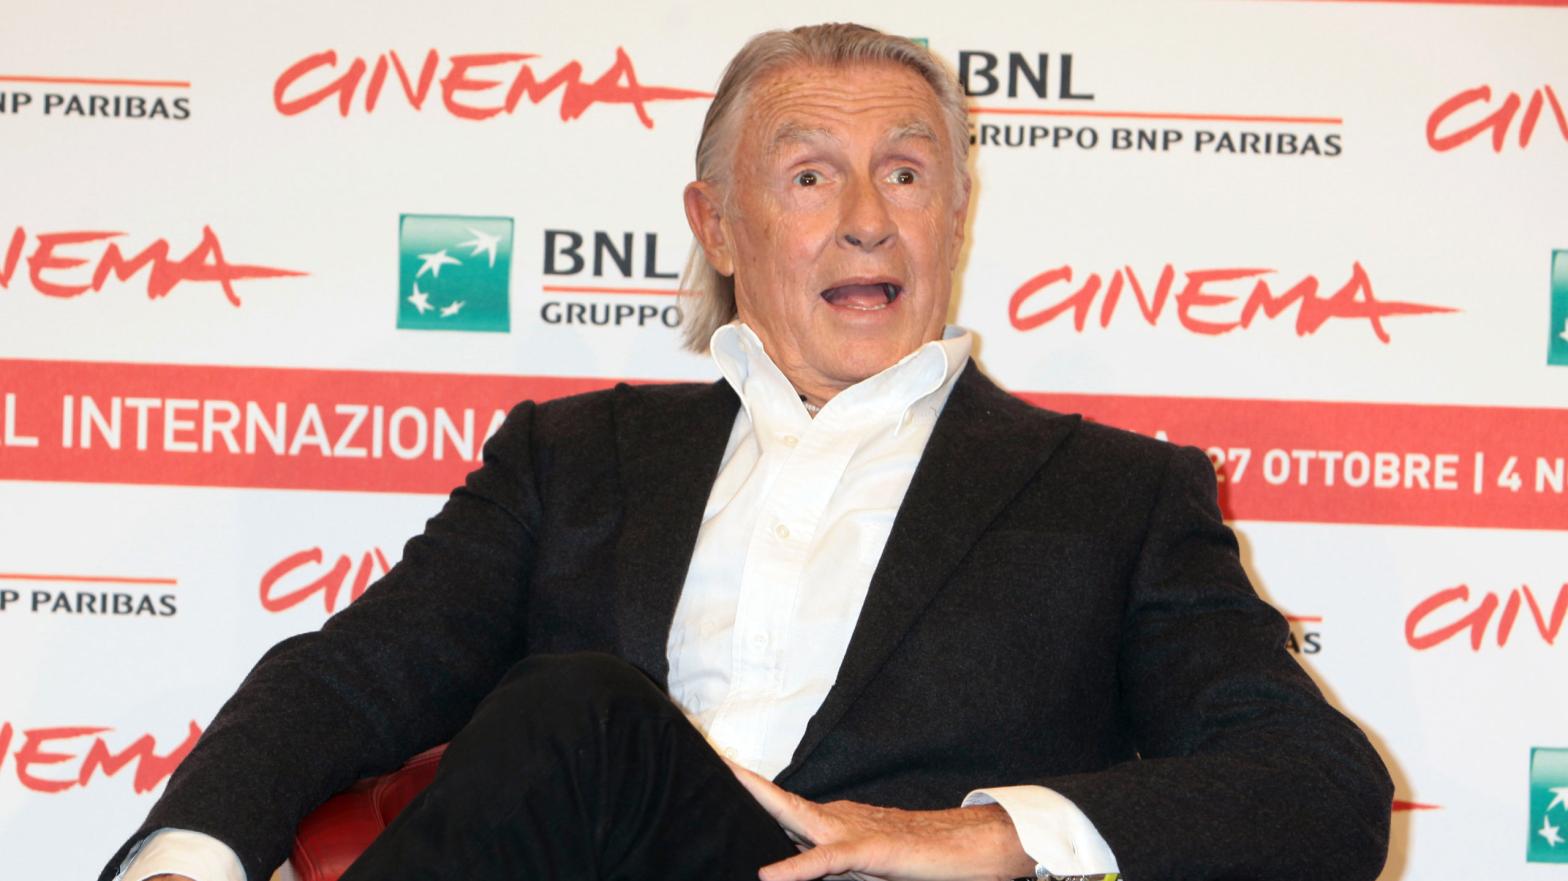 Joel Schumacher, font of camp and whimsy. (Image: Elisabetta Villa, Getty Images)